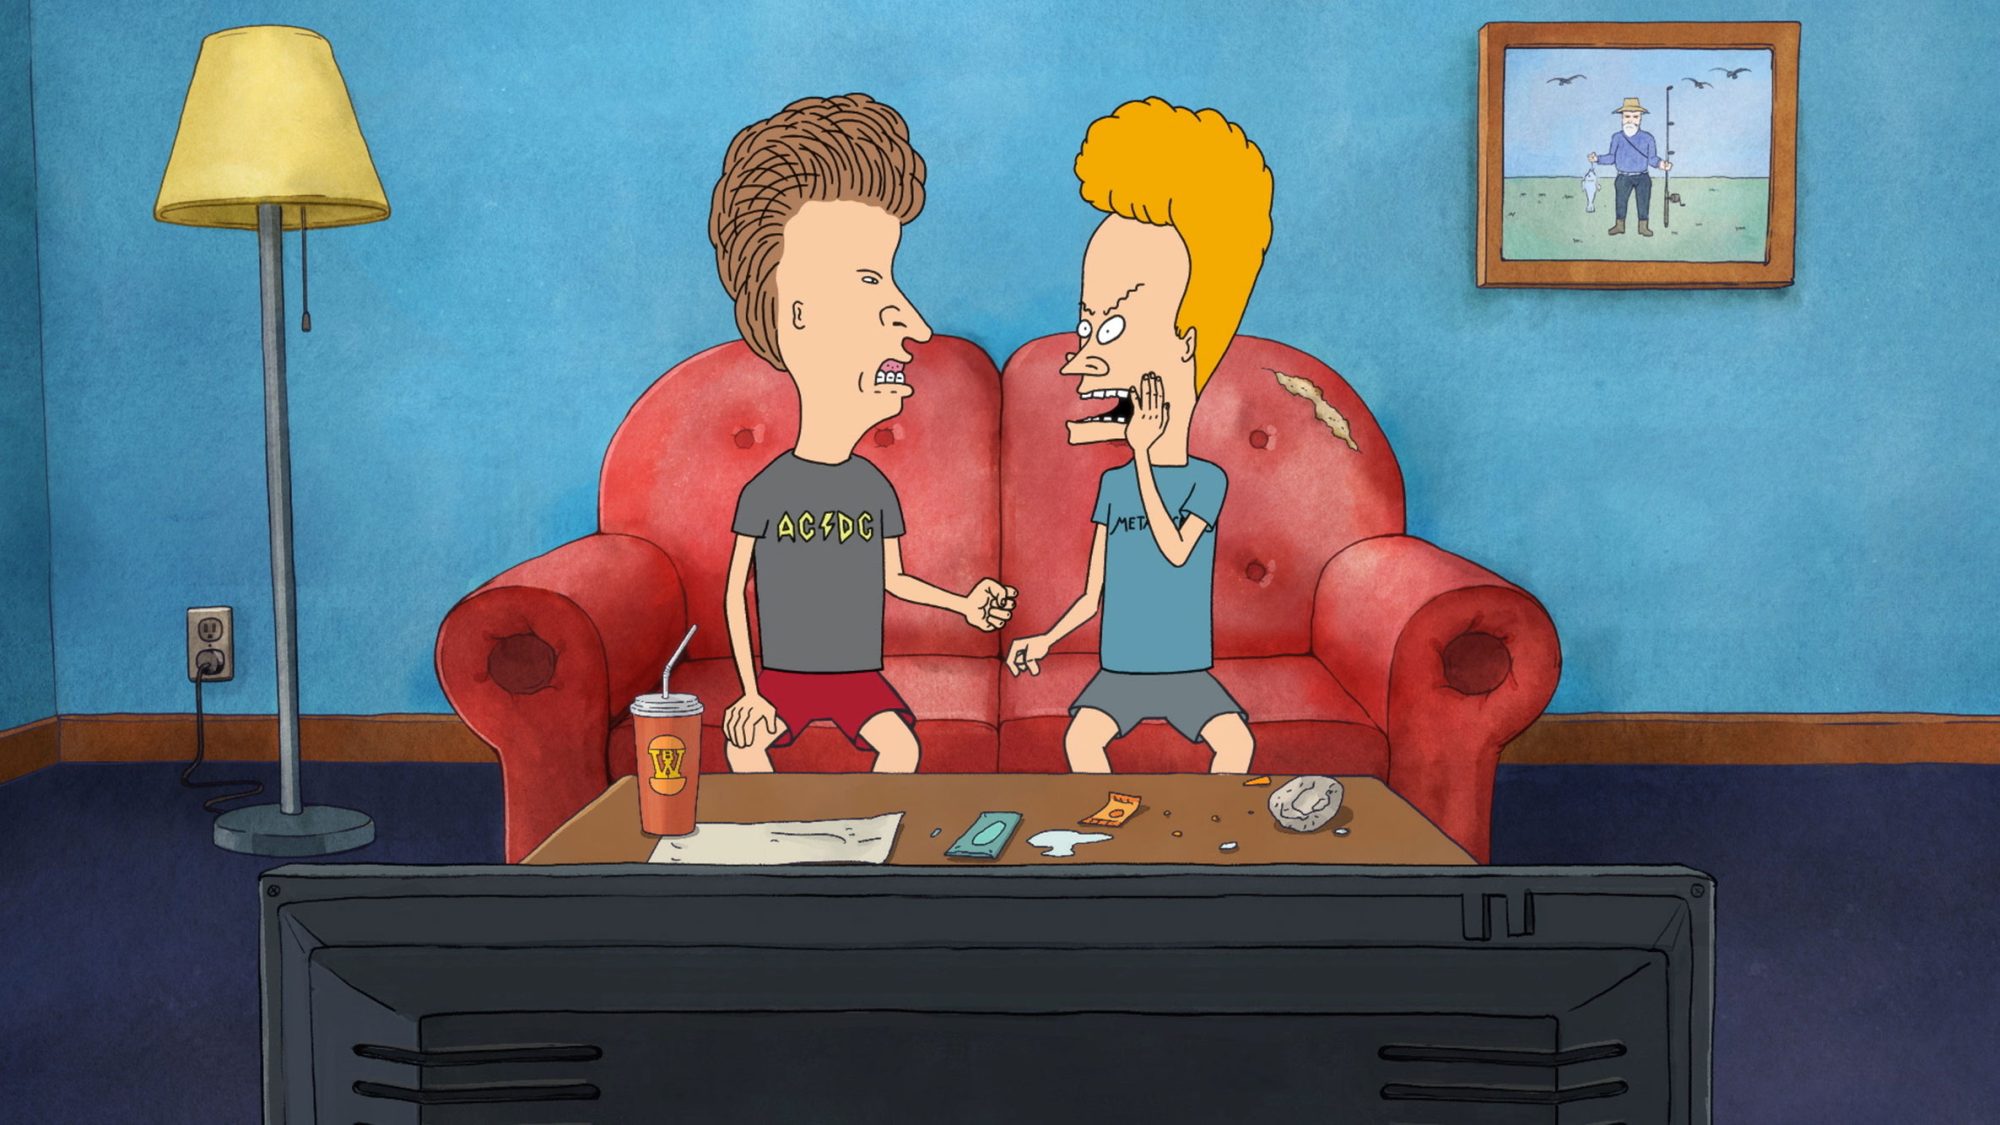 beavis and butthead living room